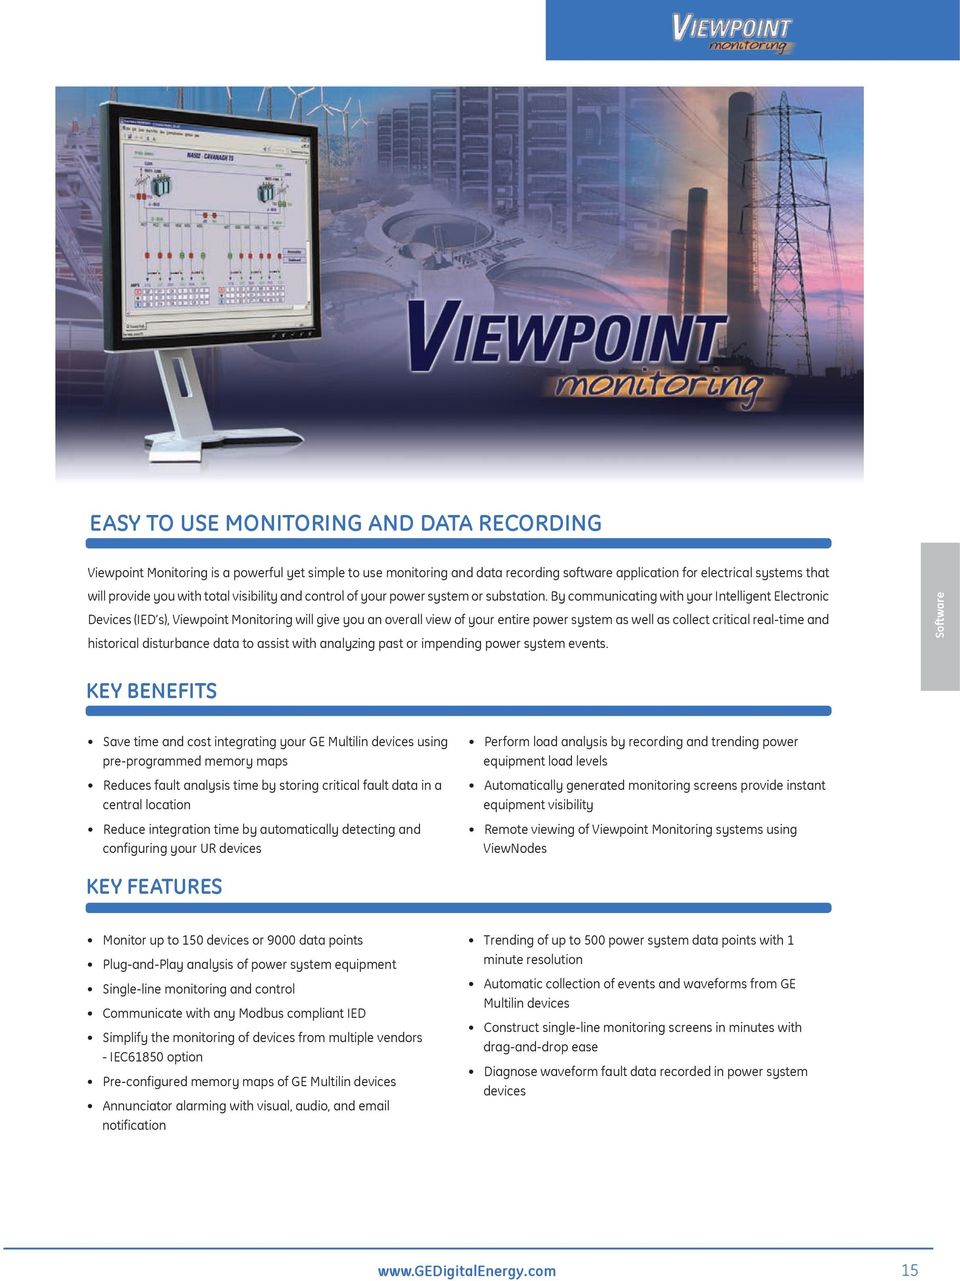 By communicating with your Intelligent Electronic Devices (IED s), Viewpoint Monitoring will give you an overall view of your entire power system as well as collect critical real-time and historical